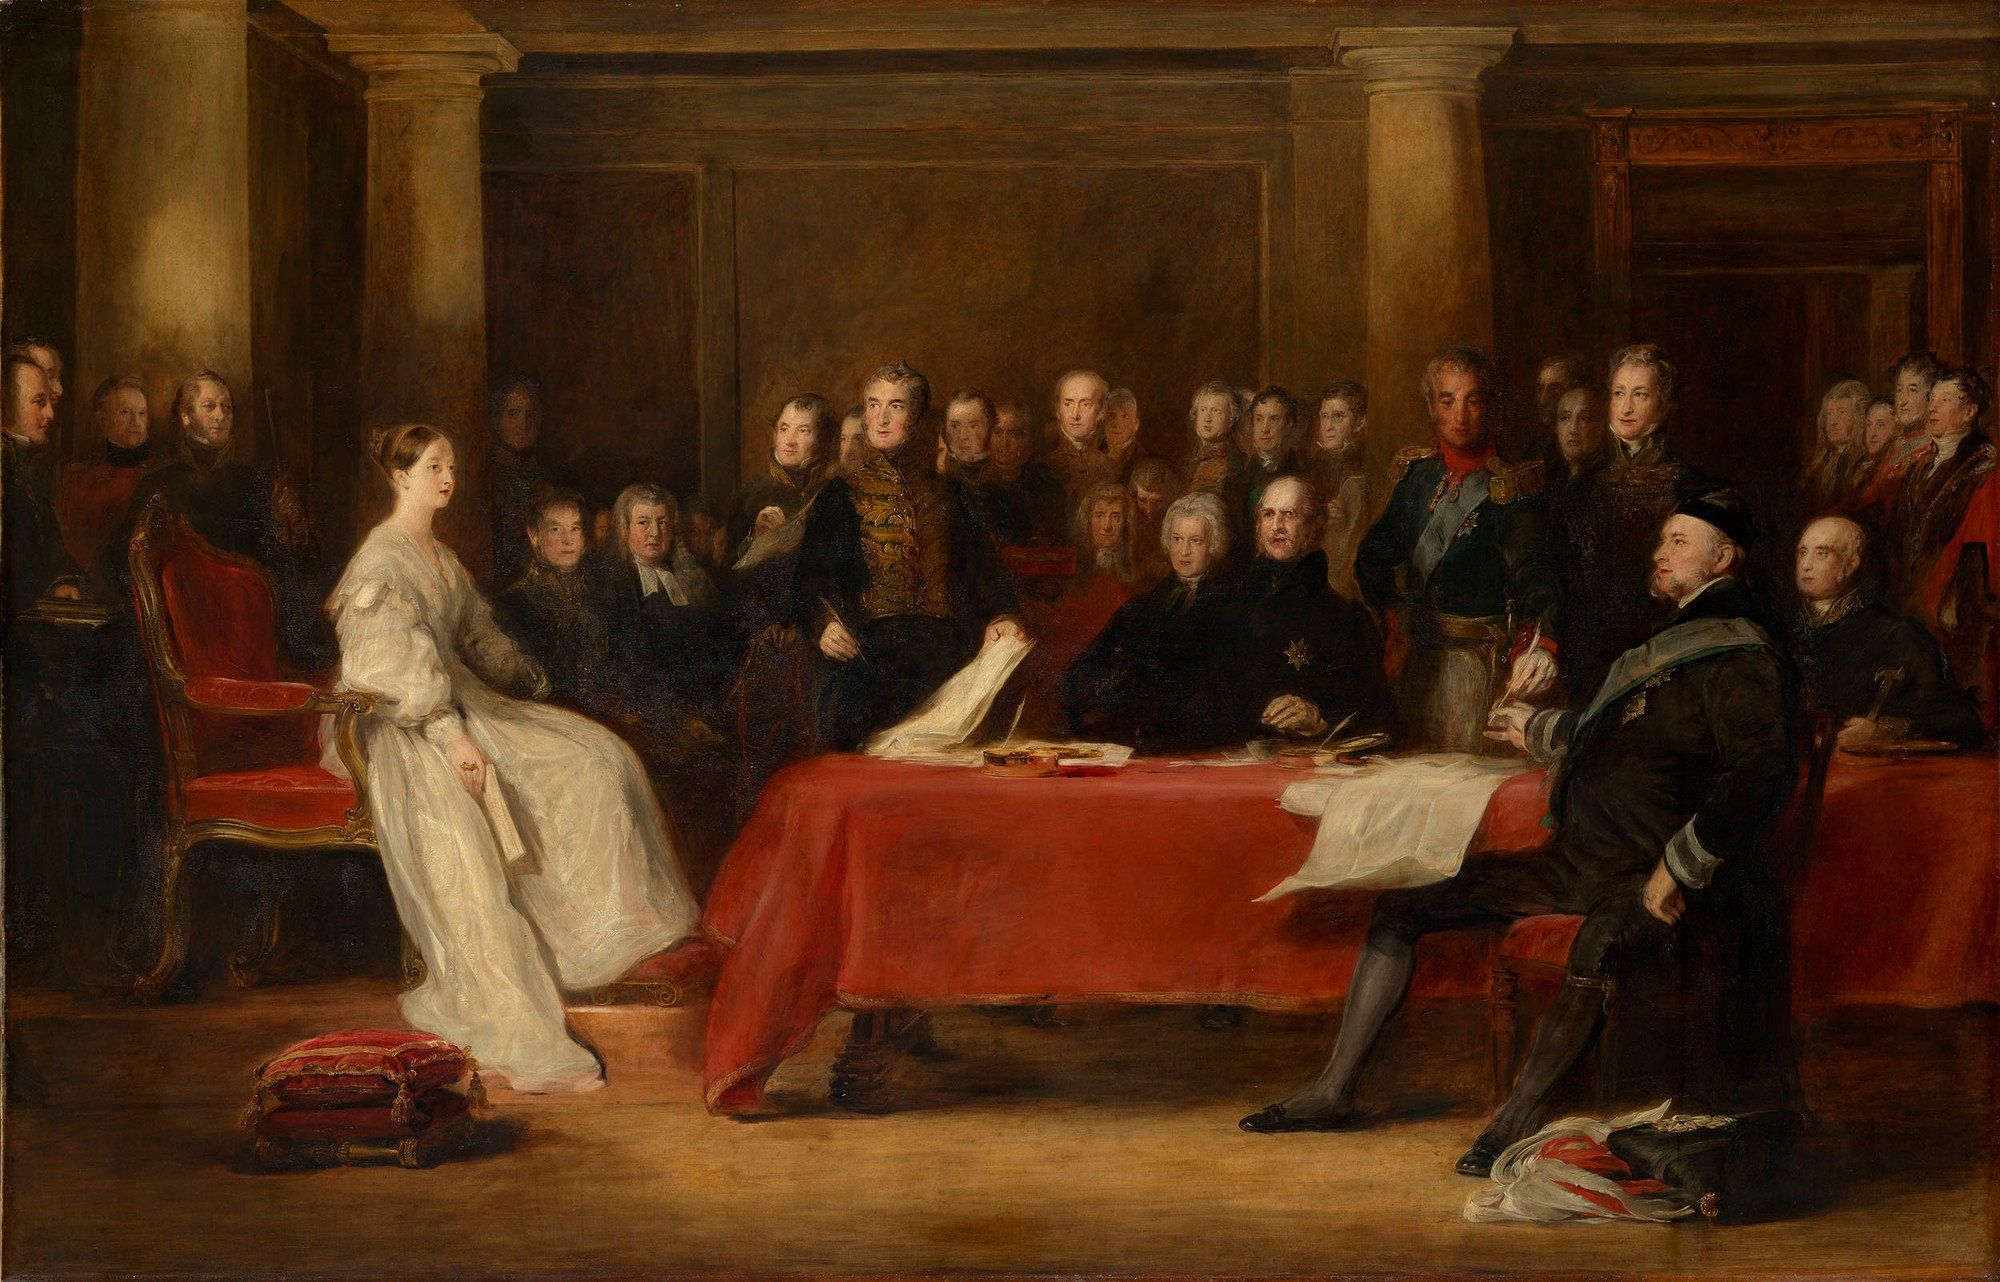 The First Council of Queen Victoria, Sir David Wilkie, 1838 